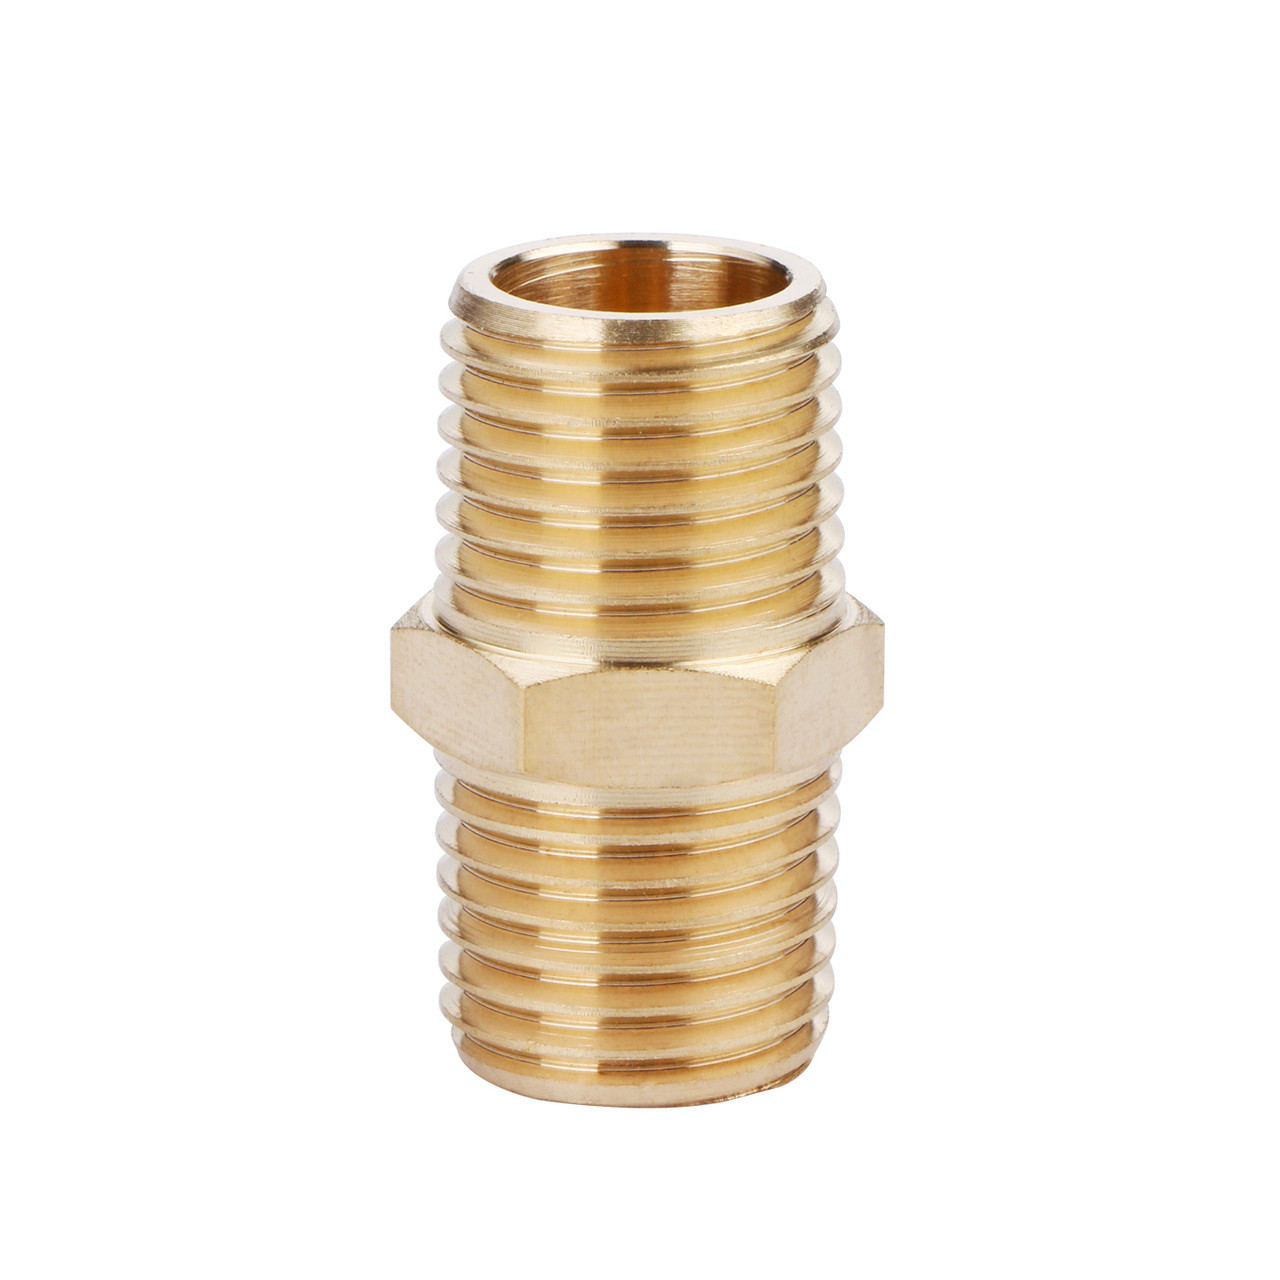 Adapter 1/2 Male x 1/2 “ Female Threaded Brass Construction NPT Pipe  Fittings - Brass Adapter 1/2 inch x 1/2 inch Pack of 1